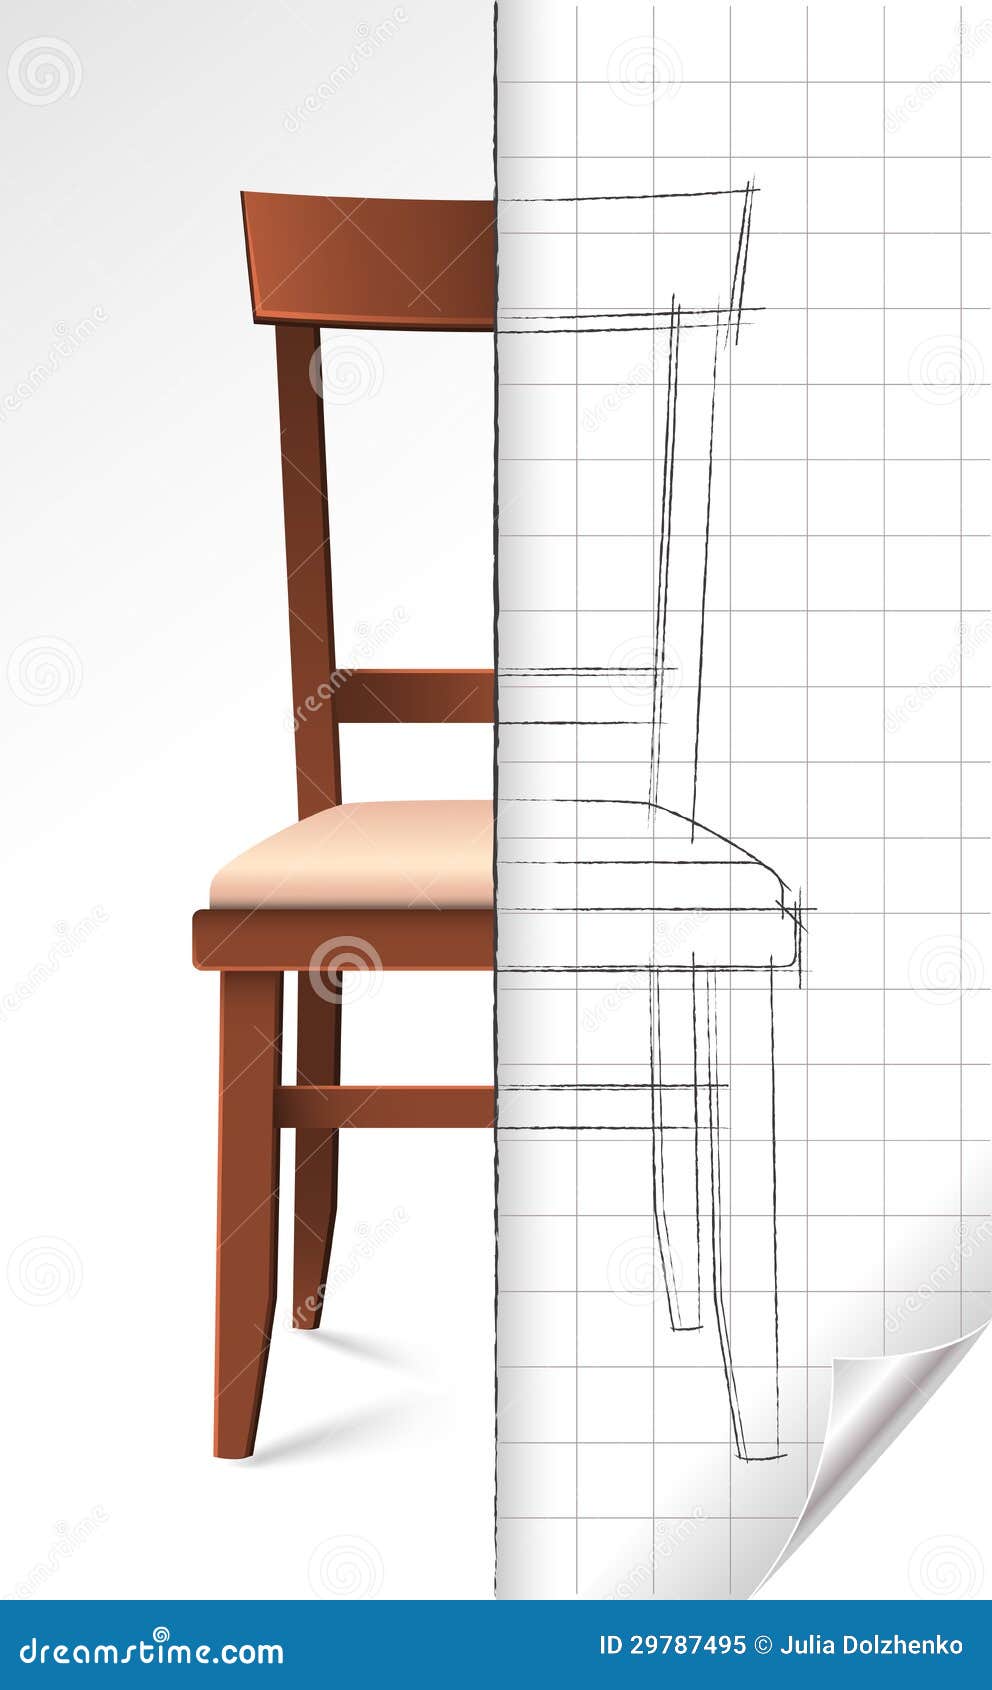 Chair Sketch Royalty Free Stock Photo - Image: 29787495